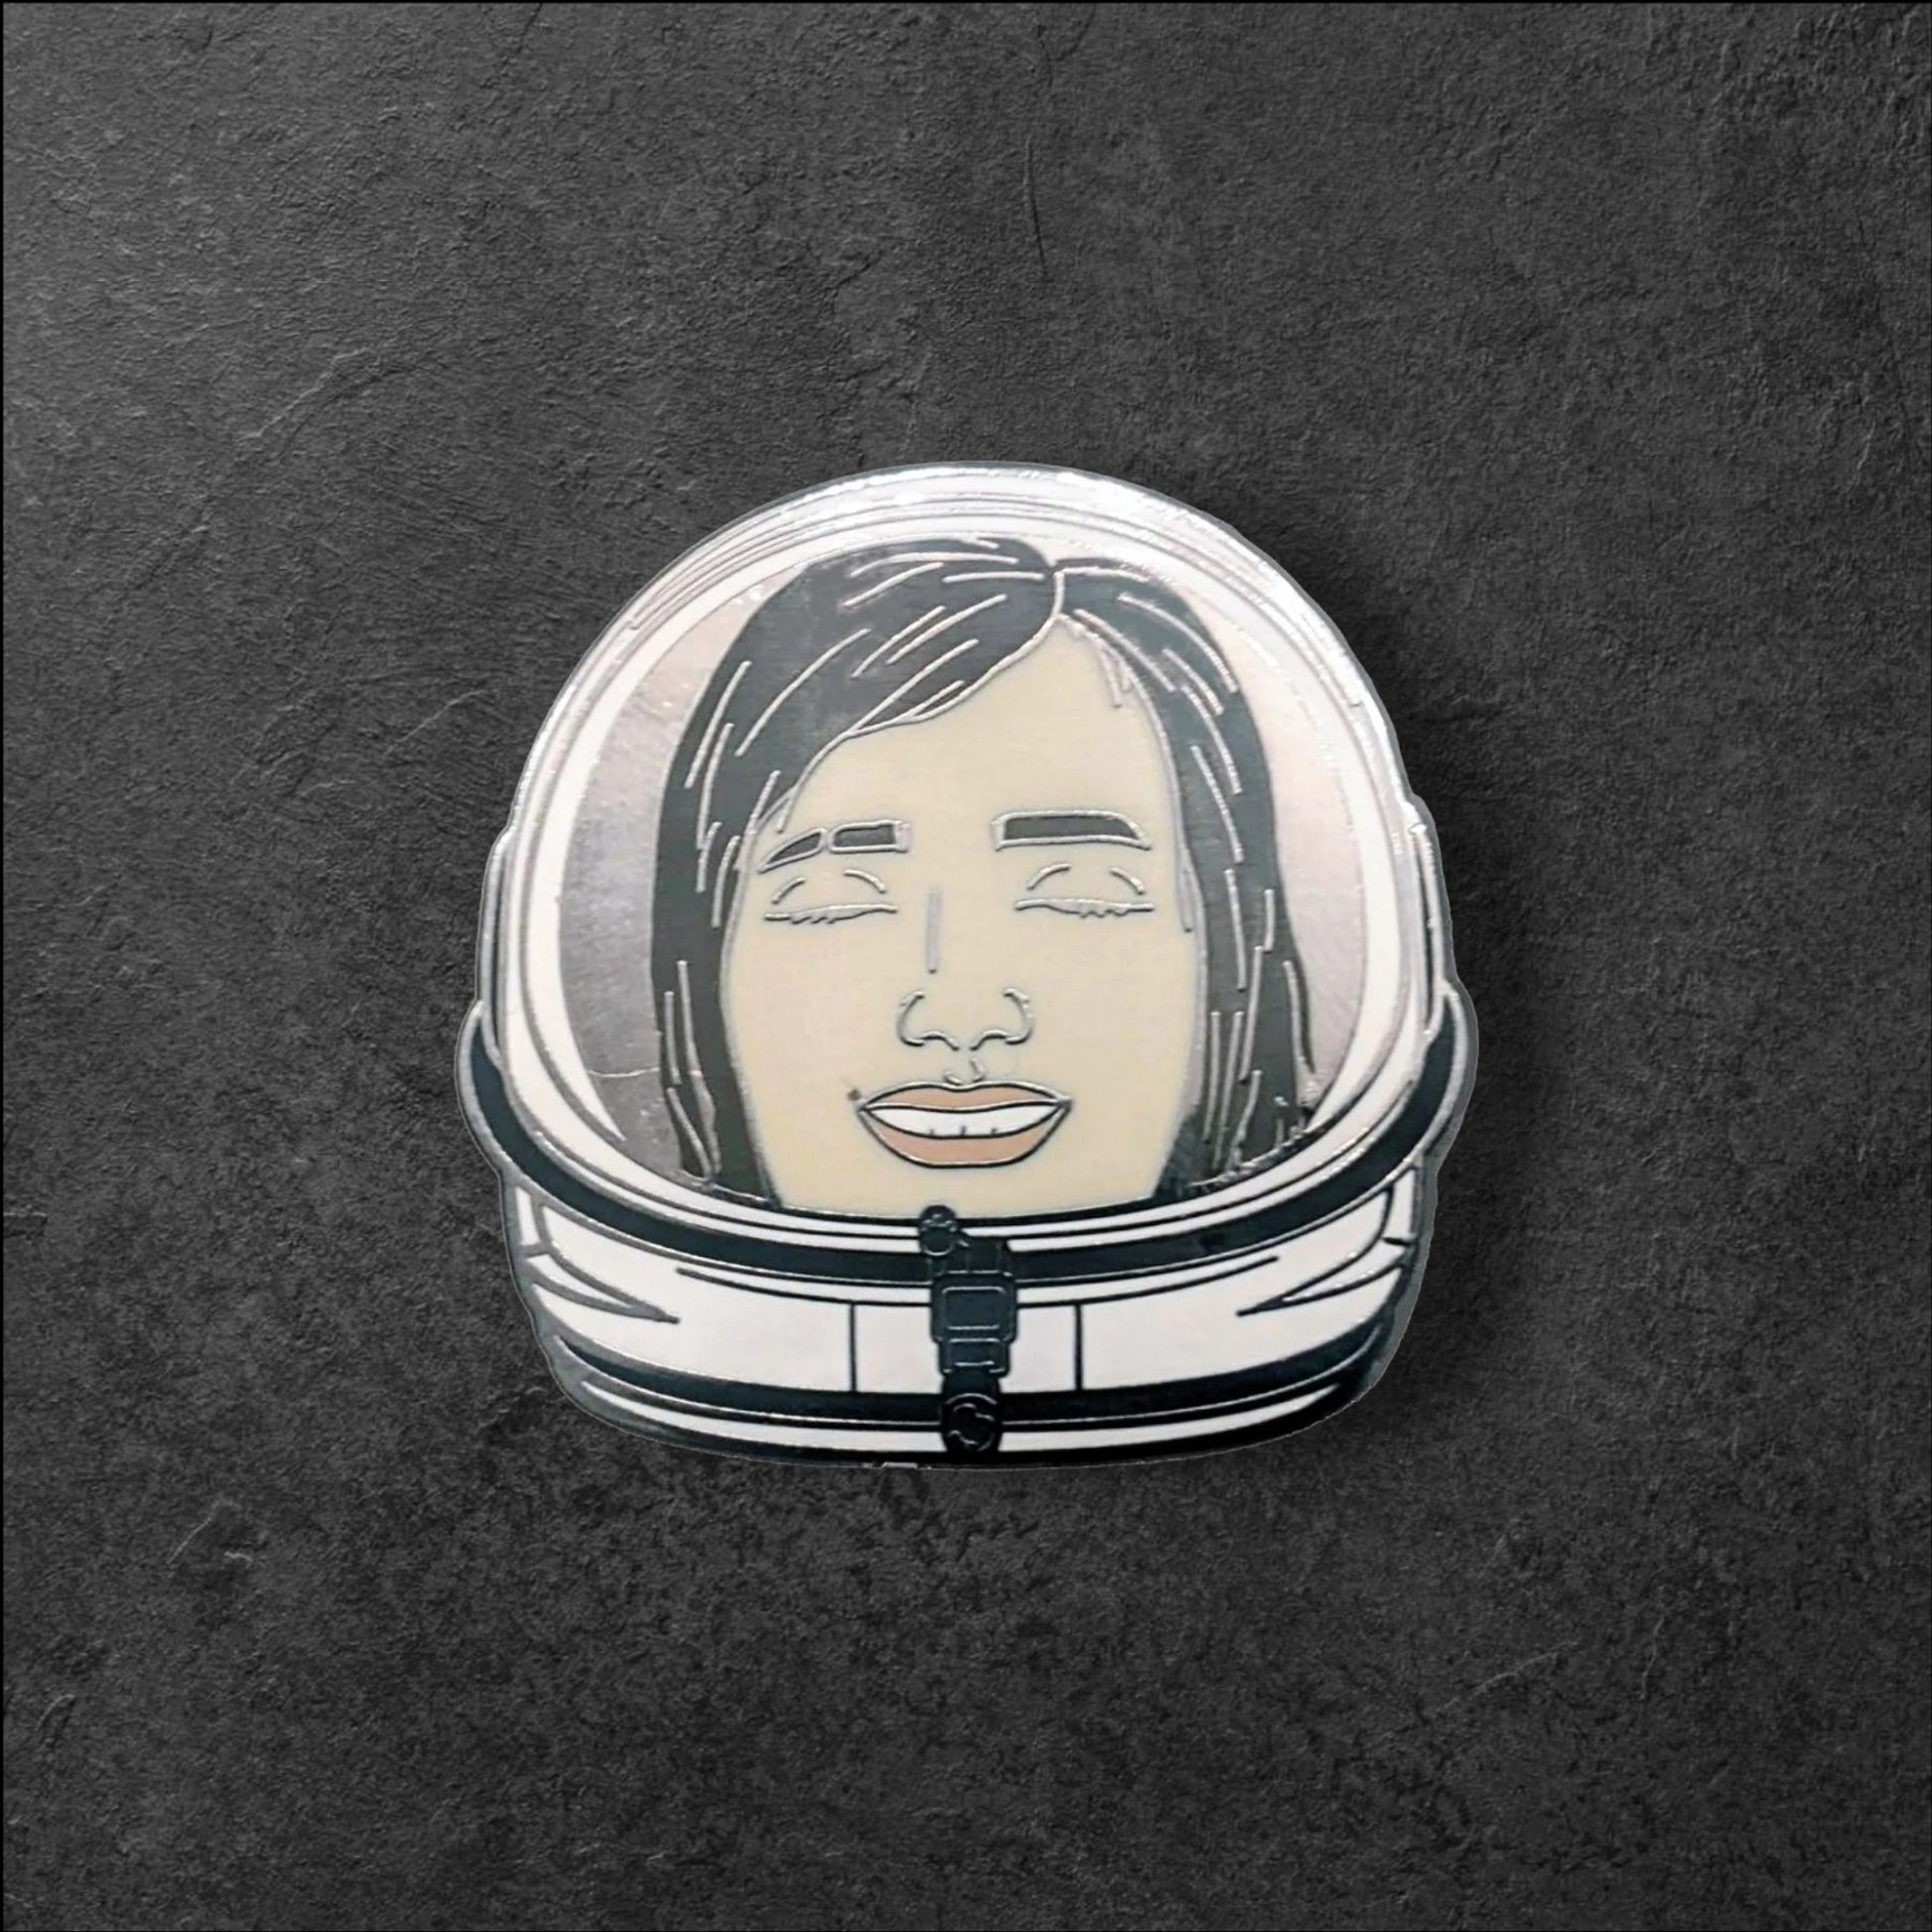 The Last Of Us Astronaut Ellie Hard Enamel Pin - Available at 2Fast2See.co